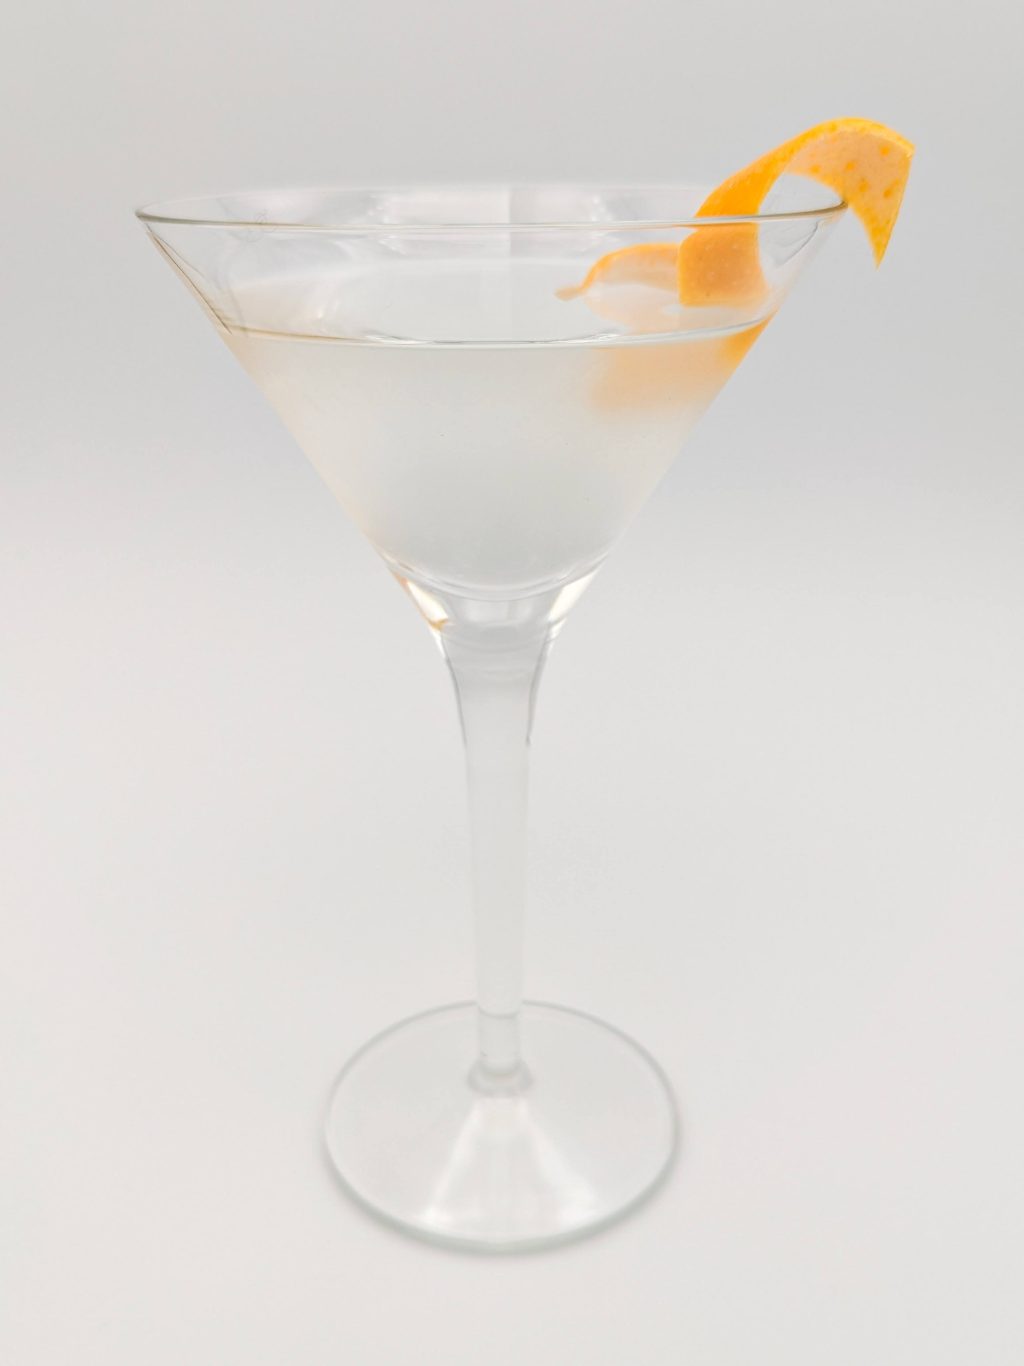 clear liquid in a martini glass with a grapefruit peel garnish